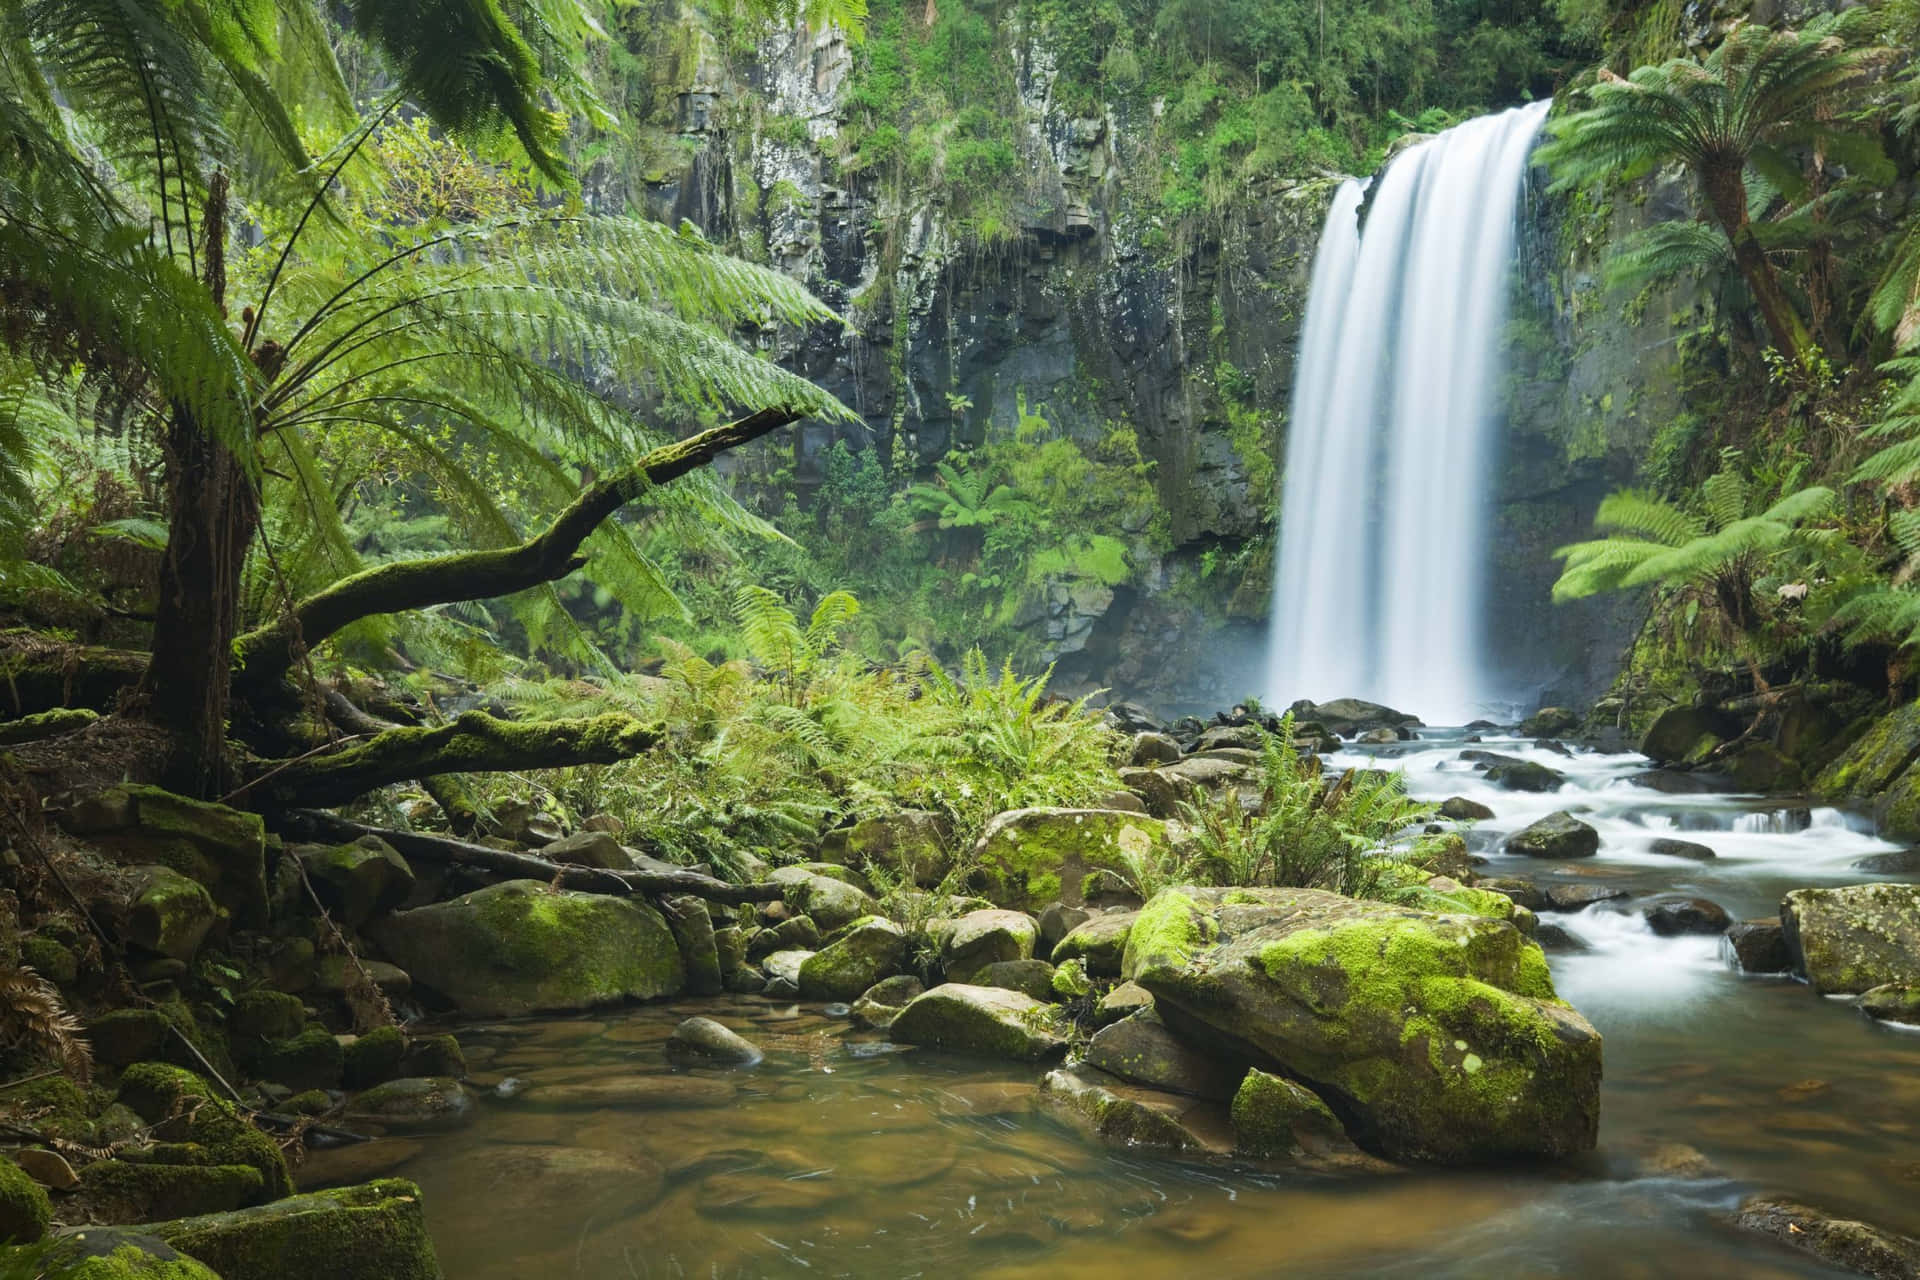 The tranquility of nature can be felt in the lush landscape of a tropical jungle.